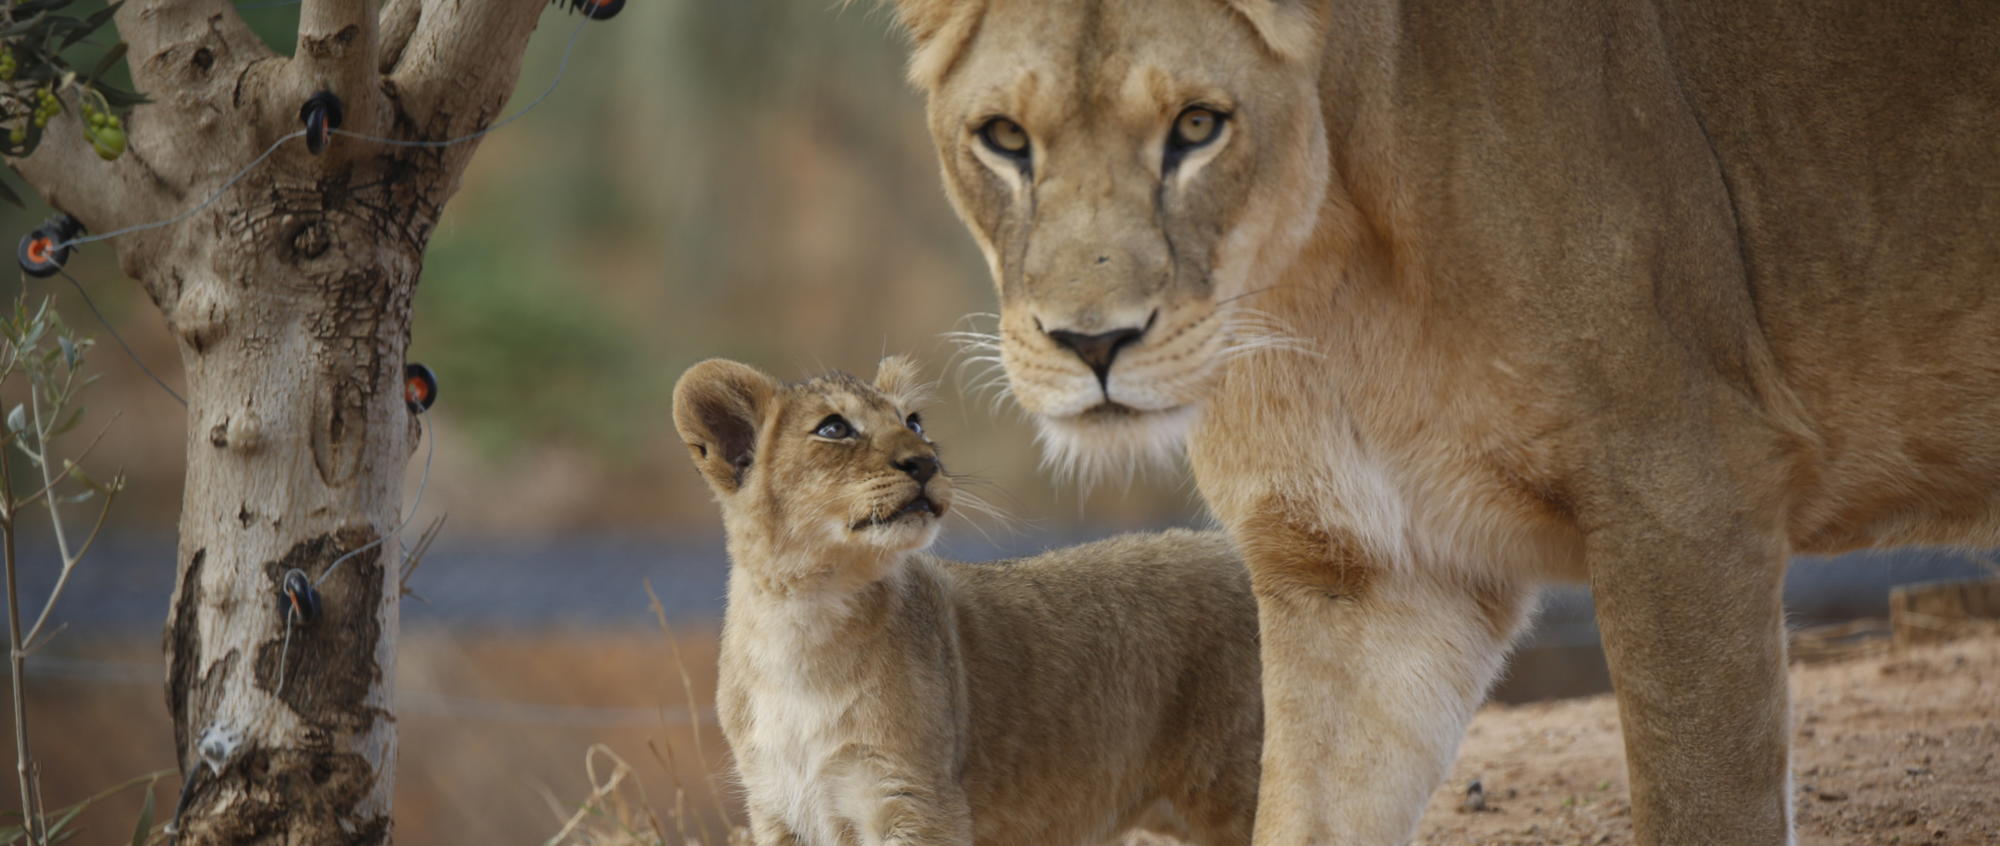 A lion cub is looking up at an adult female lion who is looking directly at camera. Tree in background.